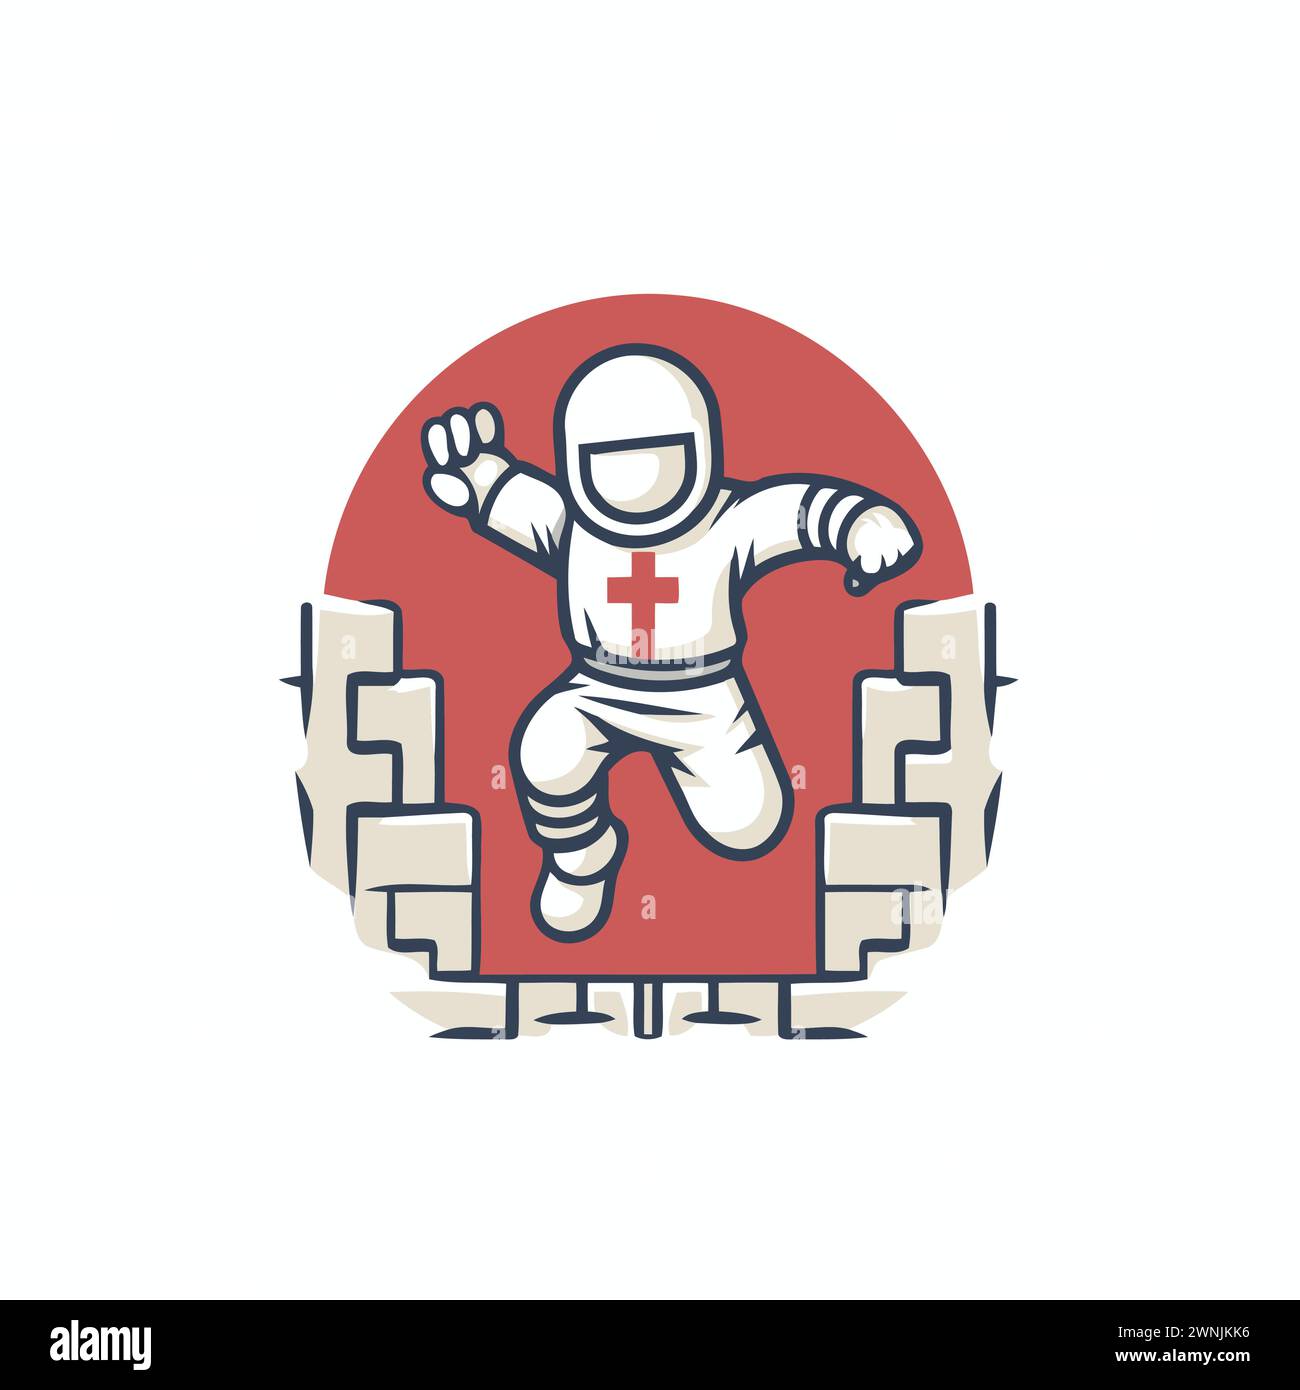 Astronaut in space suit. Astronaut icon. Vector illustration Stock Vector